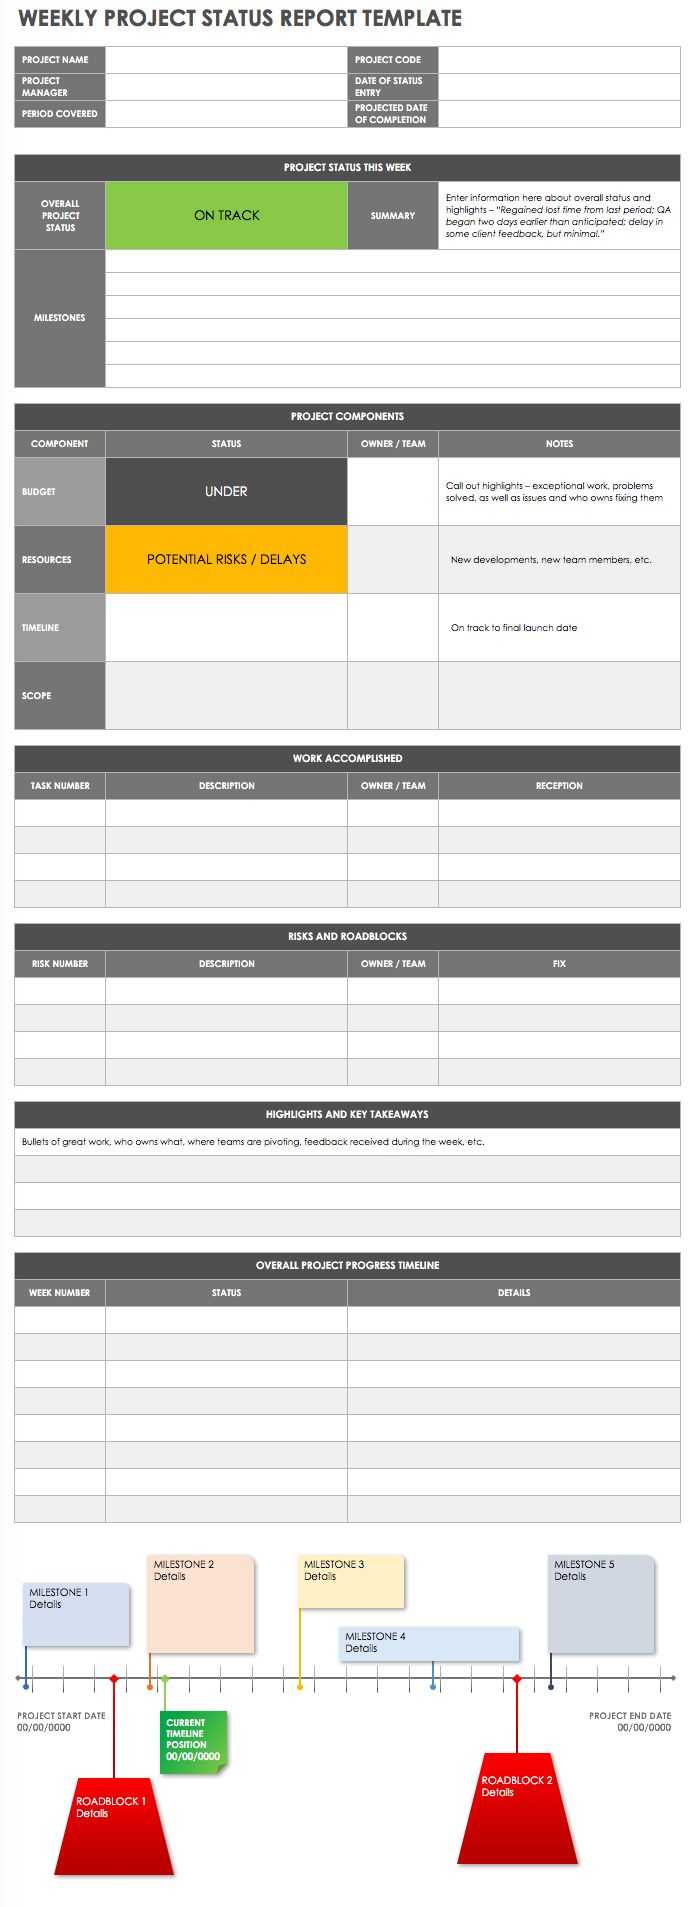 Project Reporting Template - Oflu.bntl With Regard To Weekly Project Status Report Template Powerpoint